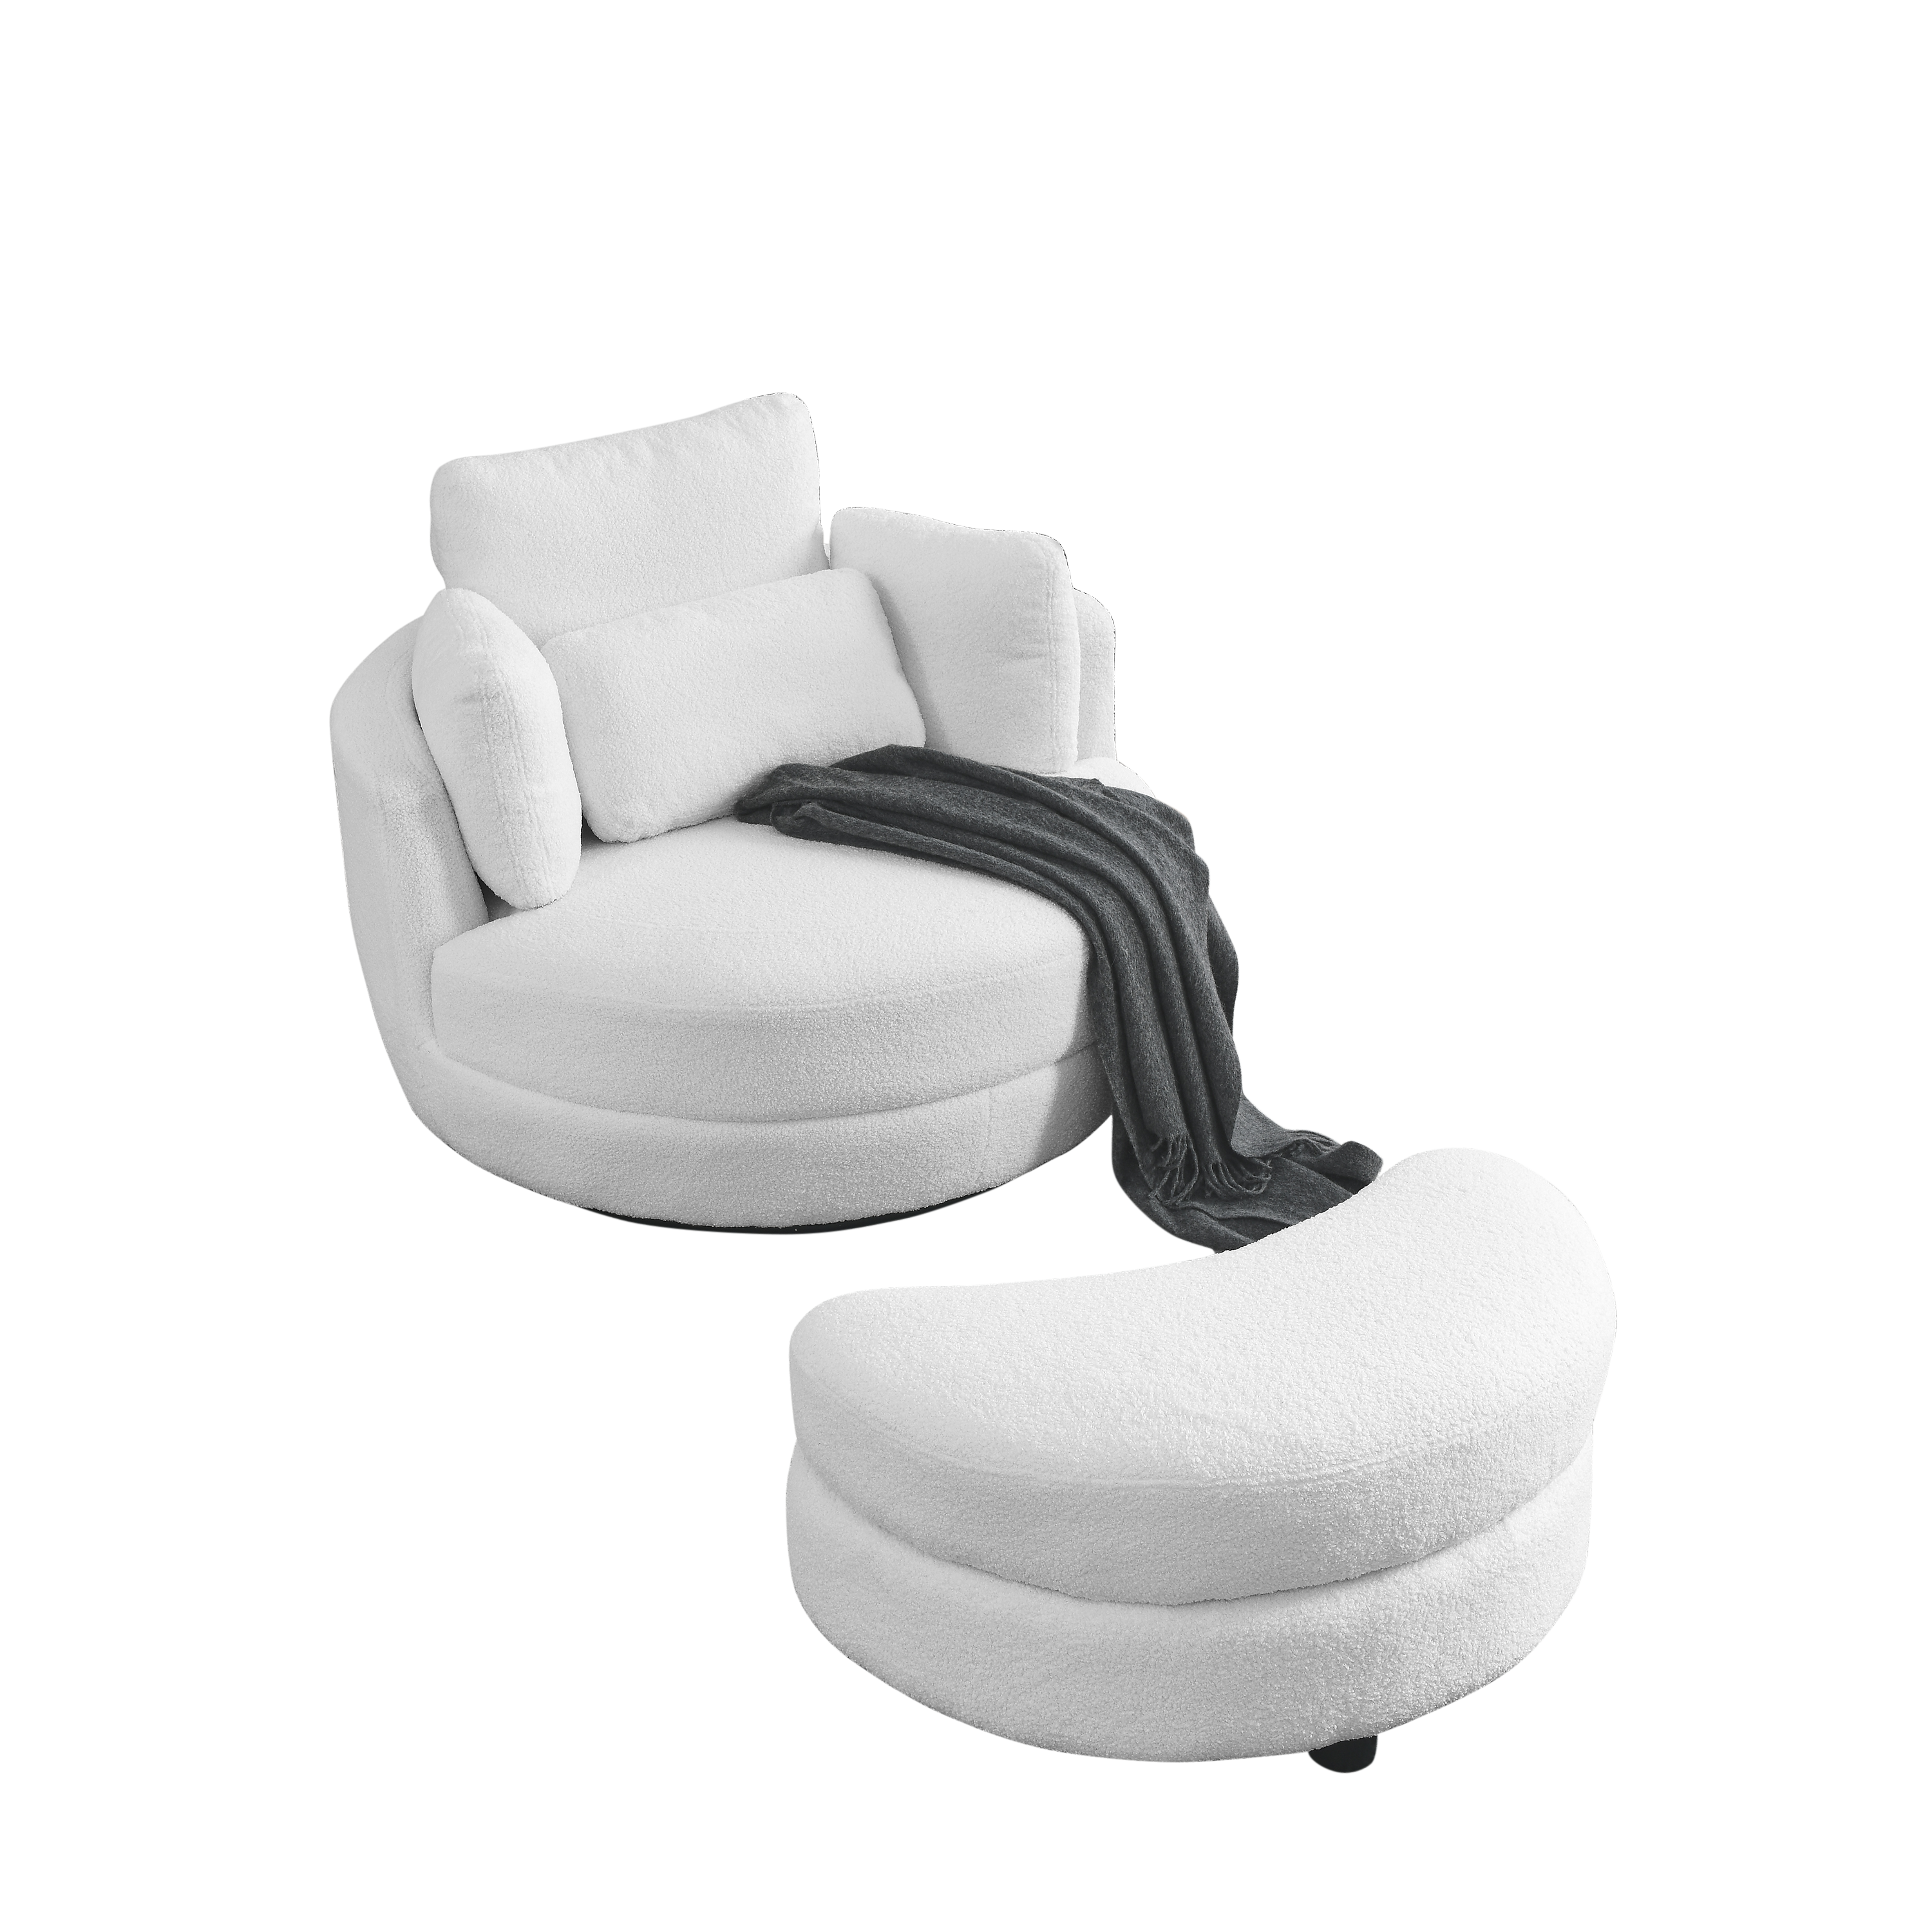 39"W Oversized Swivel Chair with Moon Storage Ottoman, 4 Pillows - Teddy Fabric White